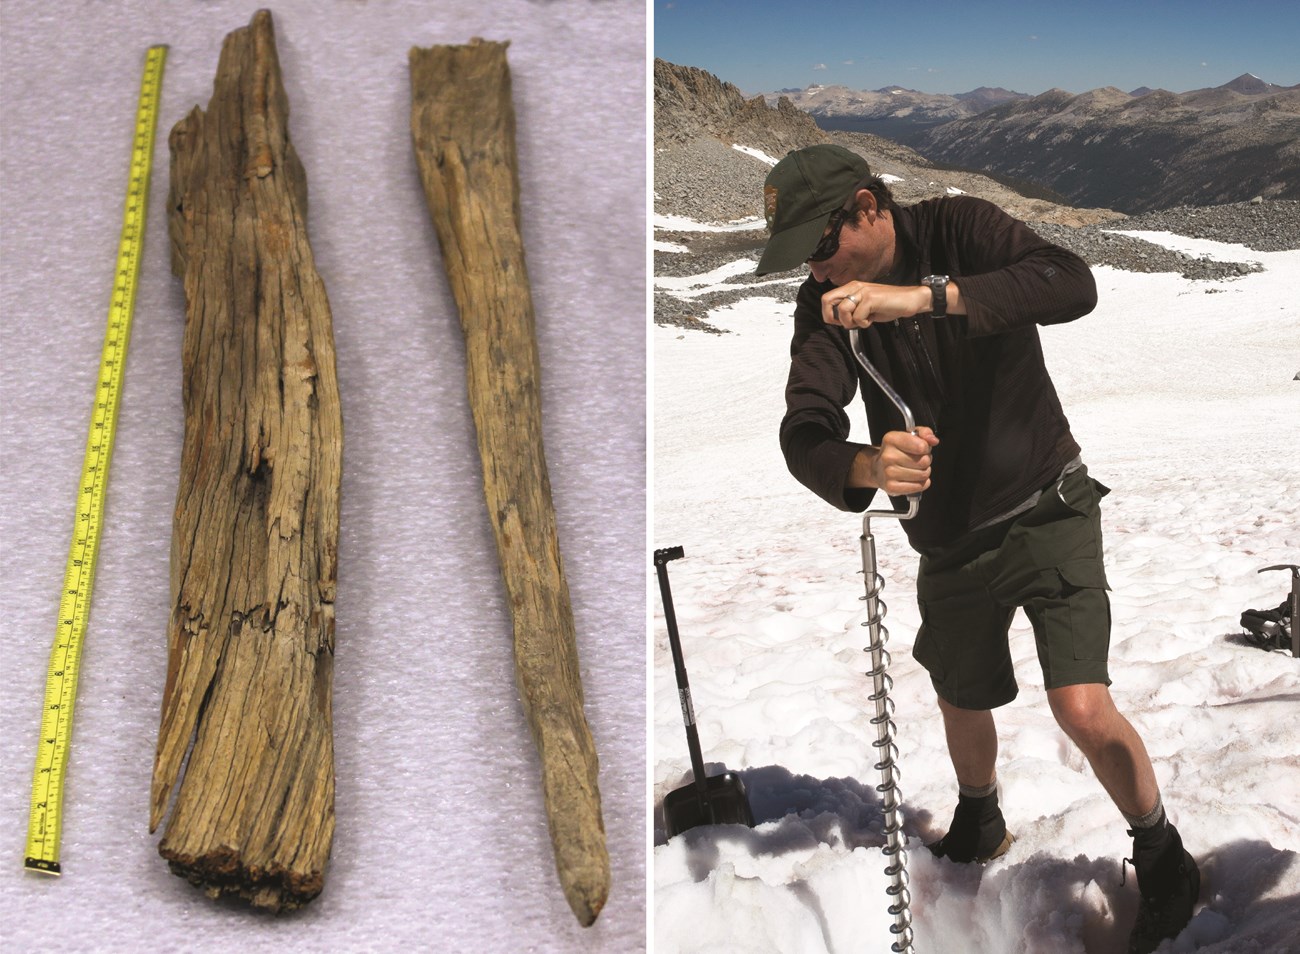 Two photos, one shows old wooden stakes, the other shows a man drilling a metal pole into a glacier